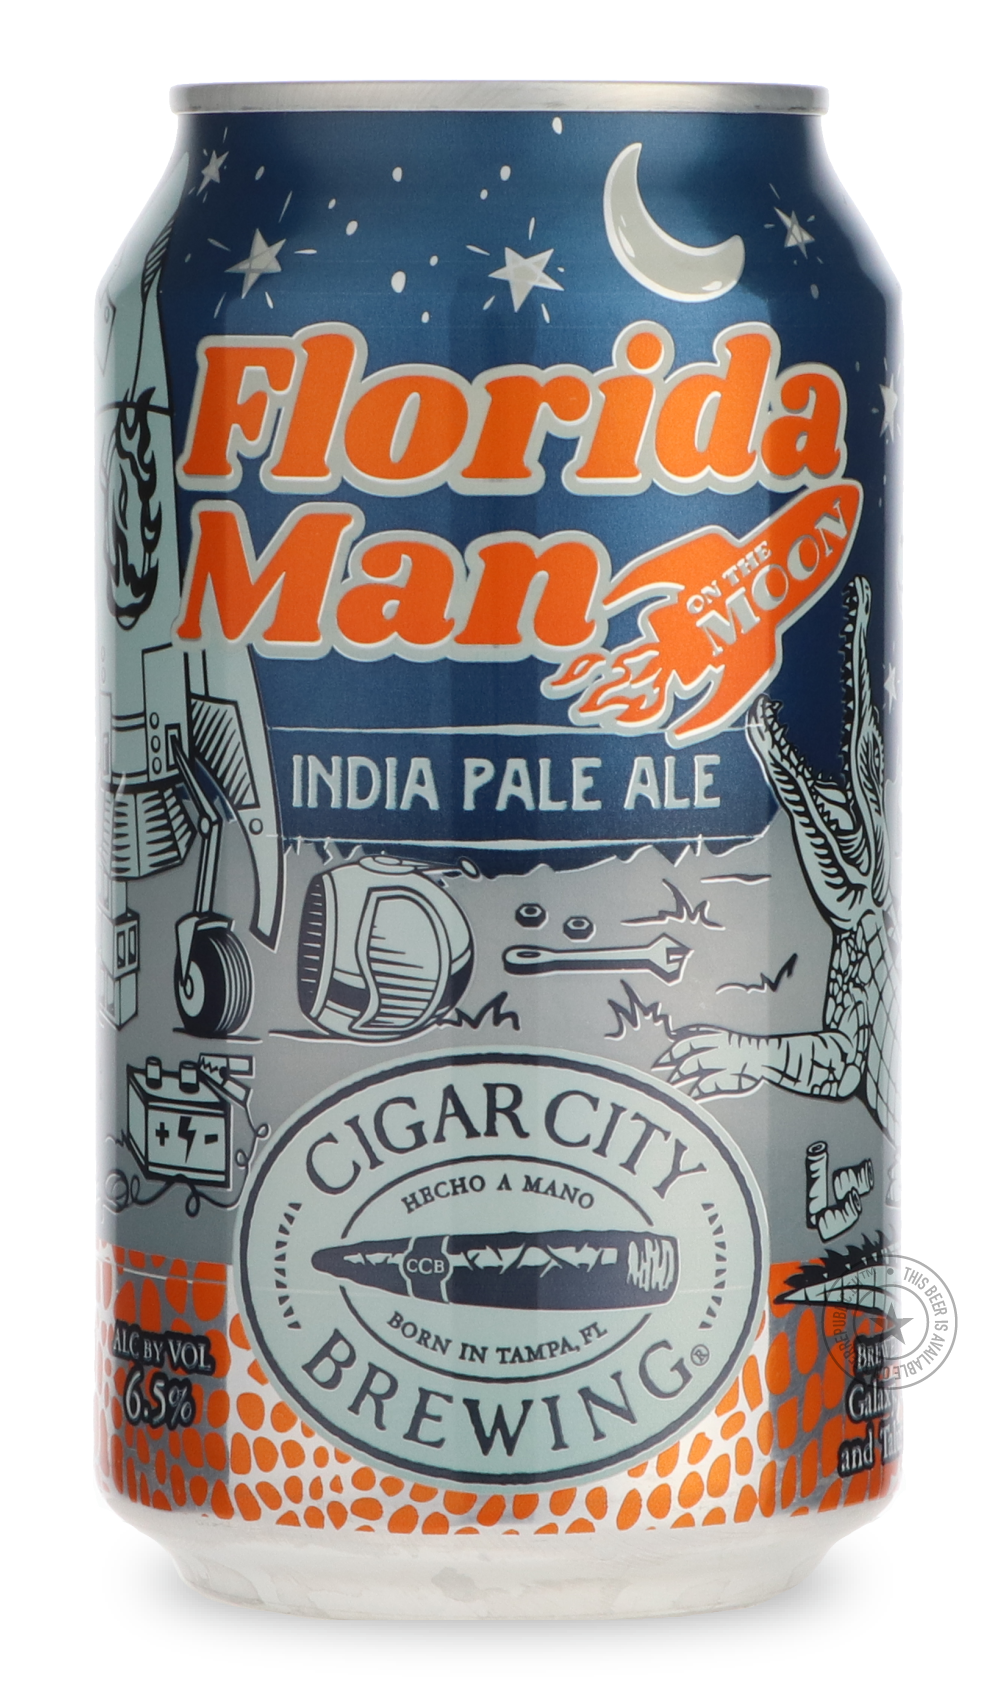 -Cigar City- Florida Man On the Moon-IPA- Only @ Beer Republic - The best online beer store for American & Canadian craft beer - Buy beer online from the USA and Canada - Bier online kopen - Amerikaans bier kopen - Craft beer store - Craft beer kopen - Amerikanisch bier kaufen - Bier online kaufen - Acheter biere online - IPA - Stout - Porter - New England IPA - Hazy IPA - Imperial Stout - Barrel Aged - Barrel Aged Imperial Stout - Brown - Dark beer - Blond - Blonde - Pilsner - Lager - Wheat - Weizen - Ambe